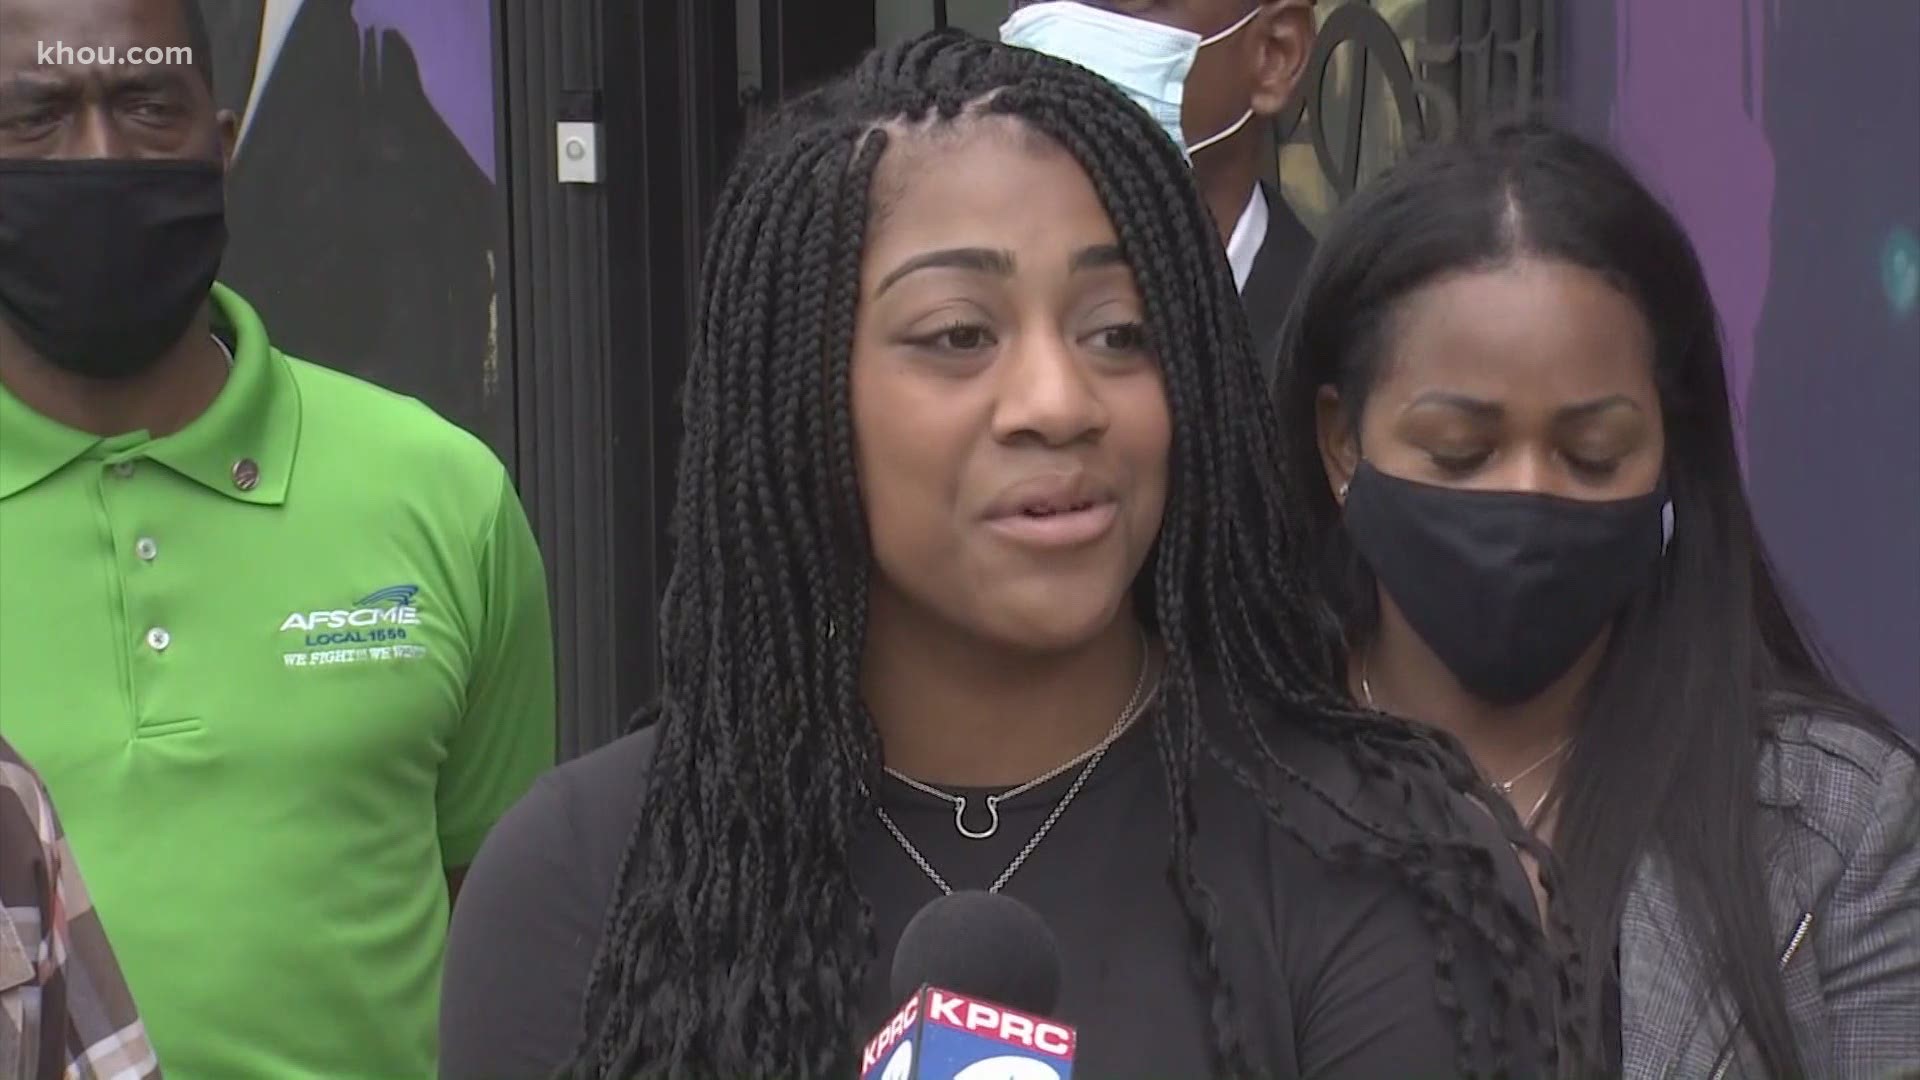 A Houston family is demanding justice after they said their daughter, who attends SFA University, woke up to police in her room after a false report was made.